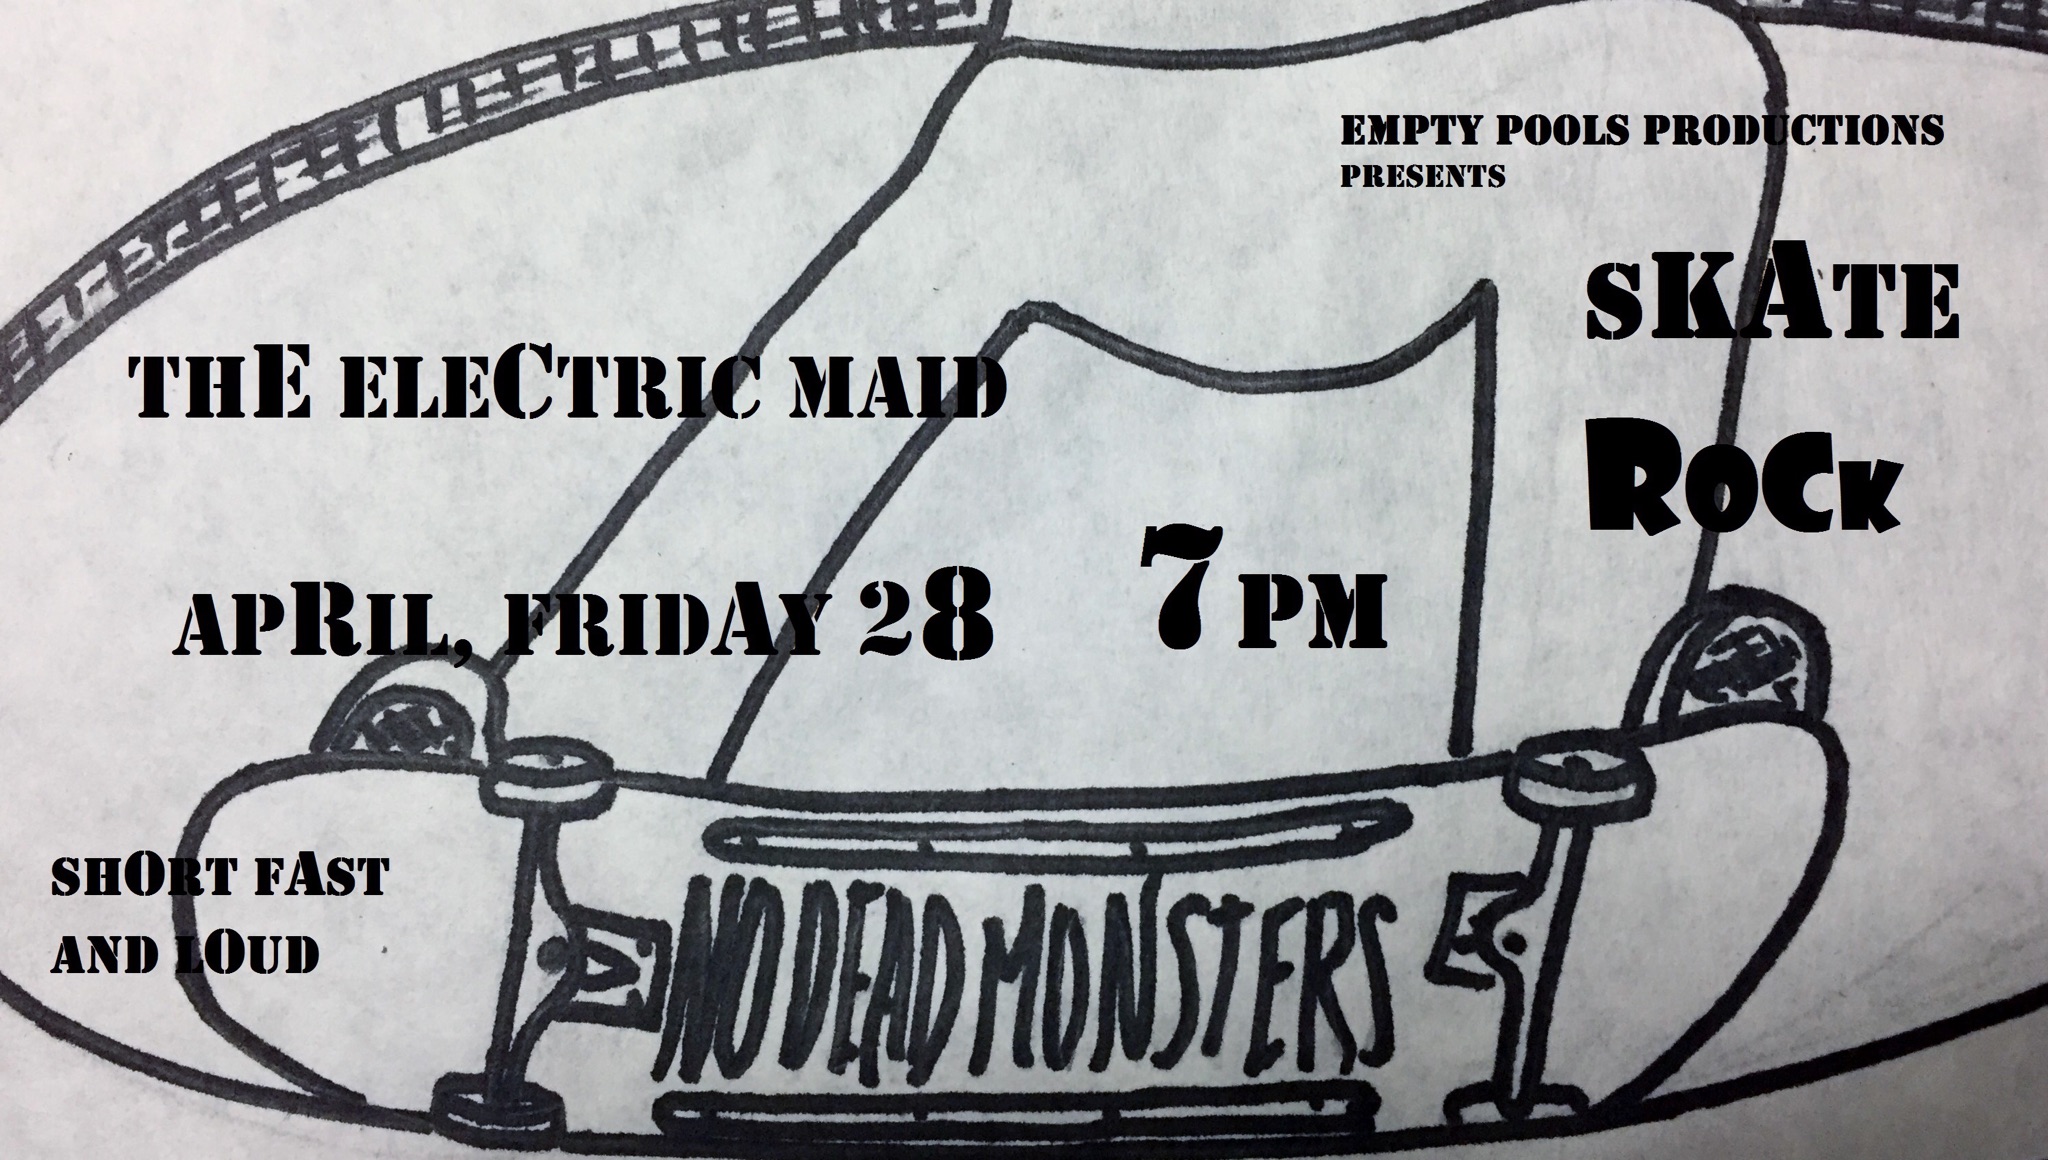 No Dead Monster Electric Maid show flyer